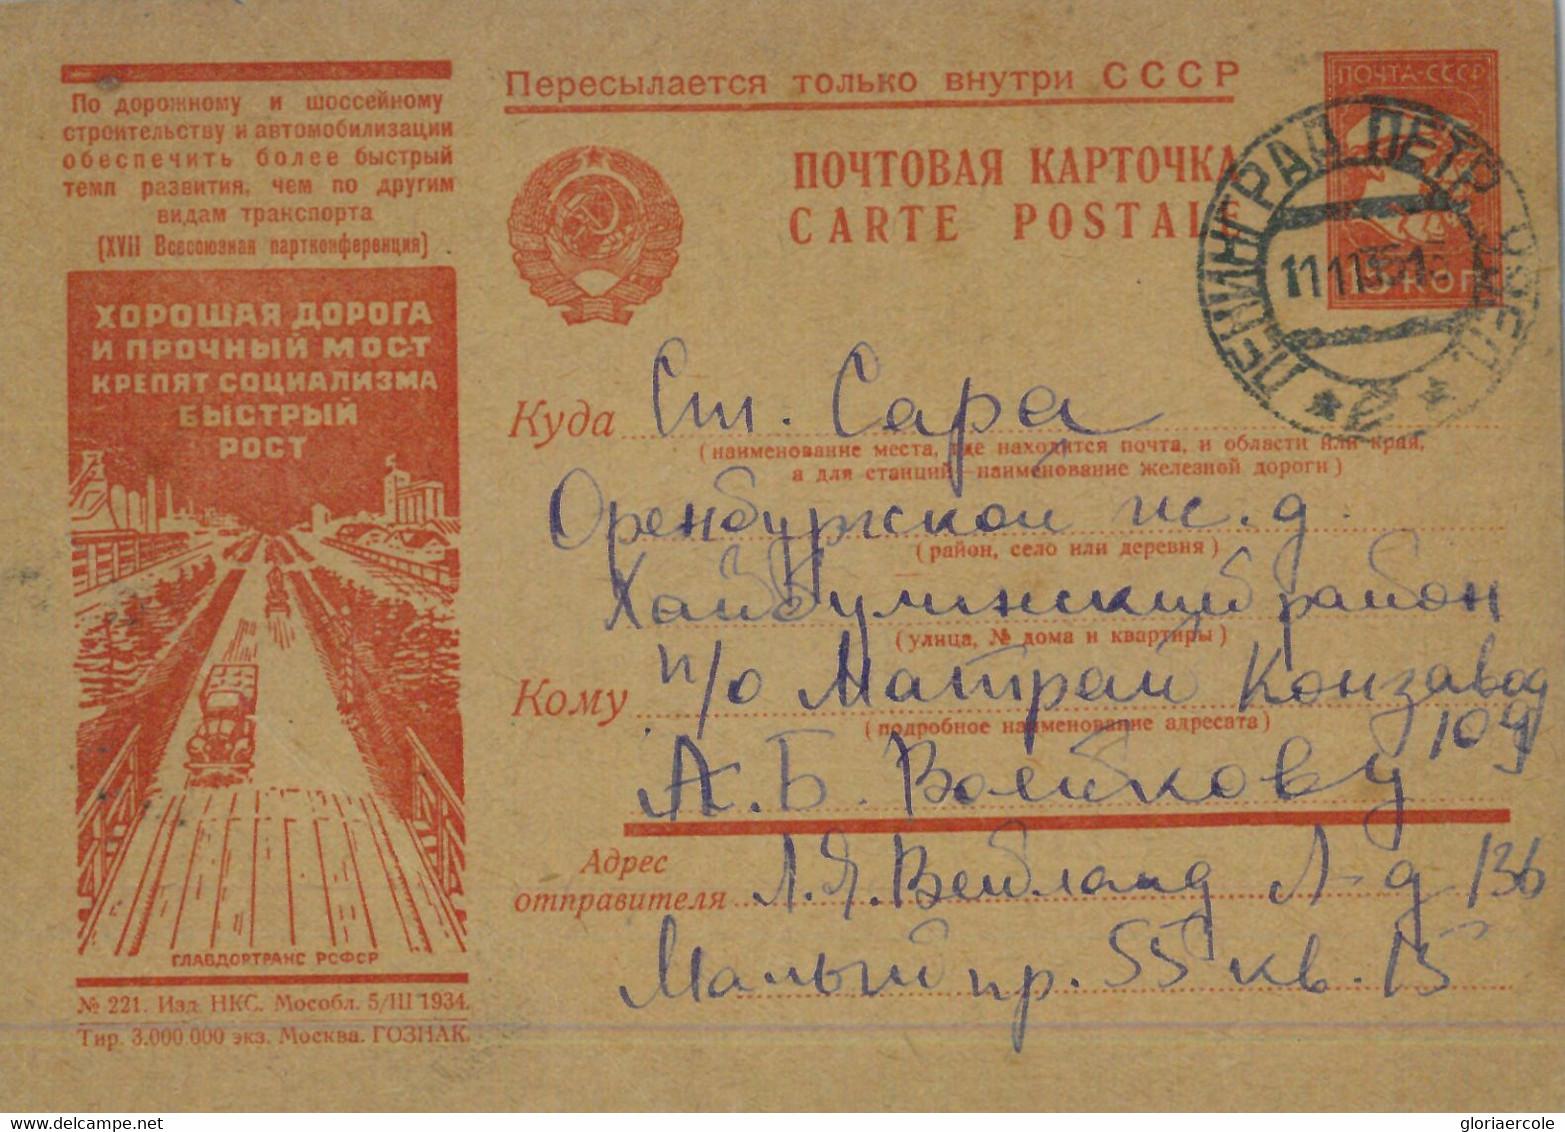 93334  - USSR Russia - POSTAL  STATIONERY COVER - CARS Transport TRAFFIC  1935 - ...-1949